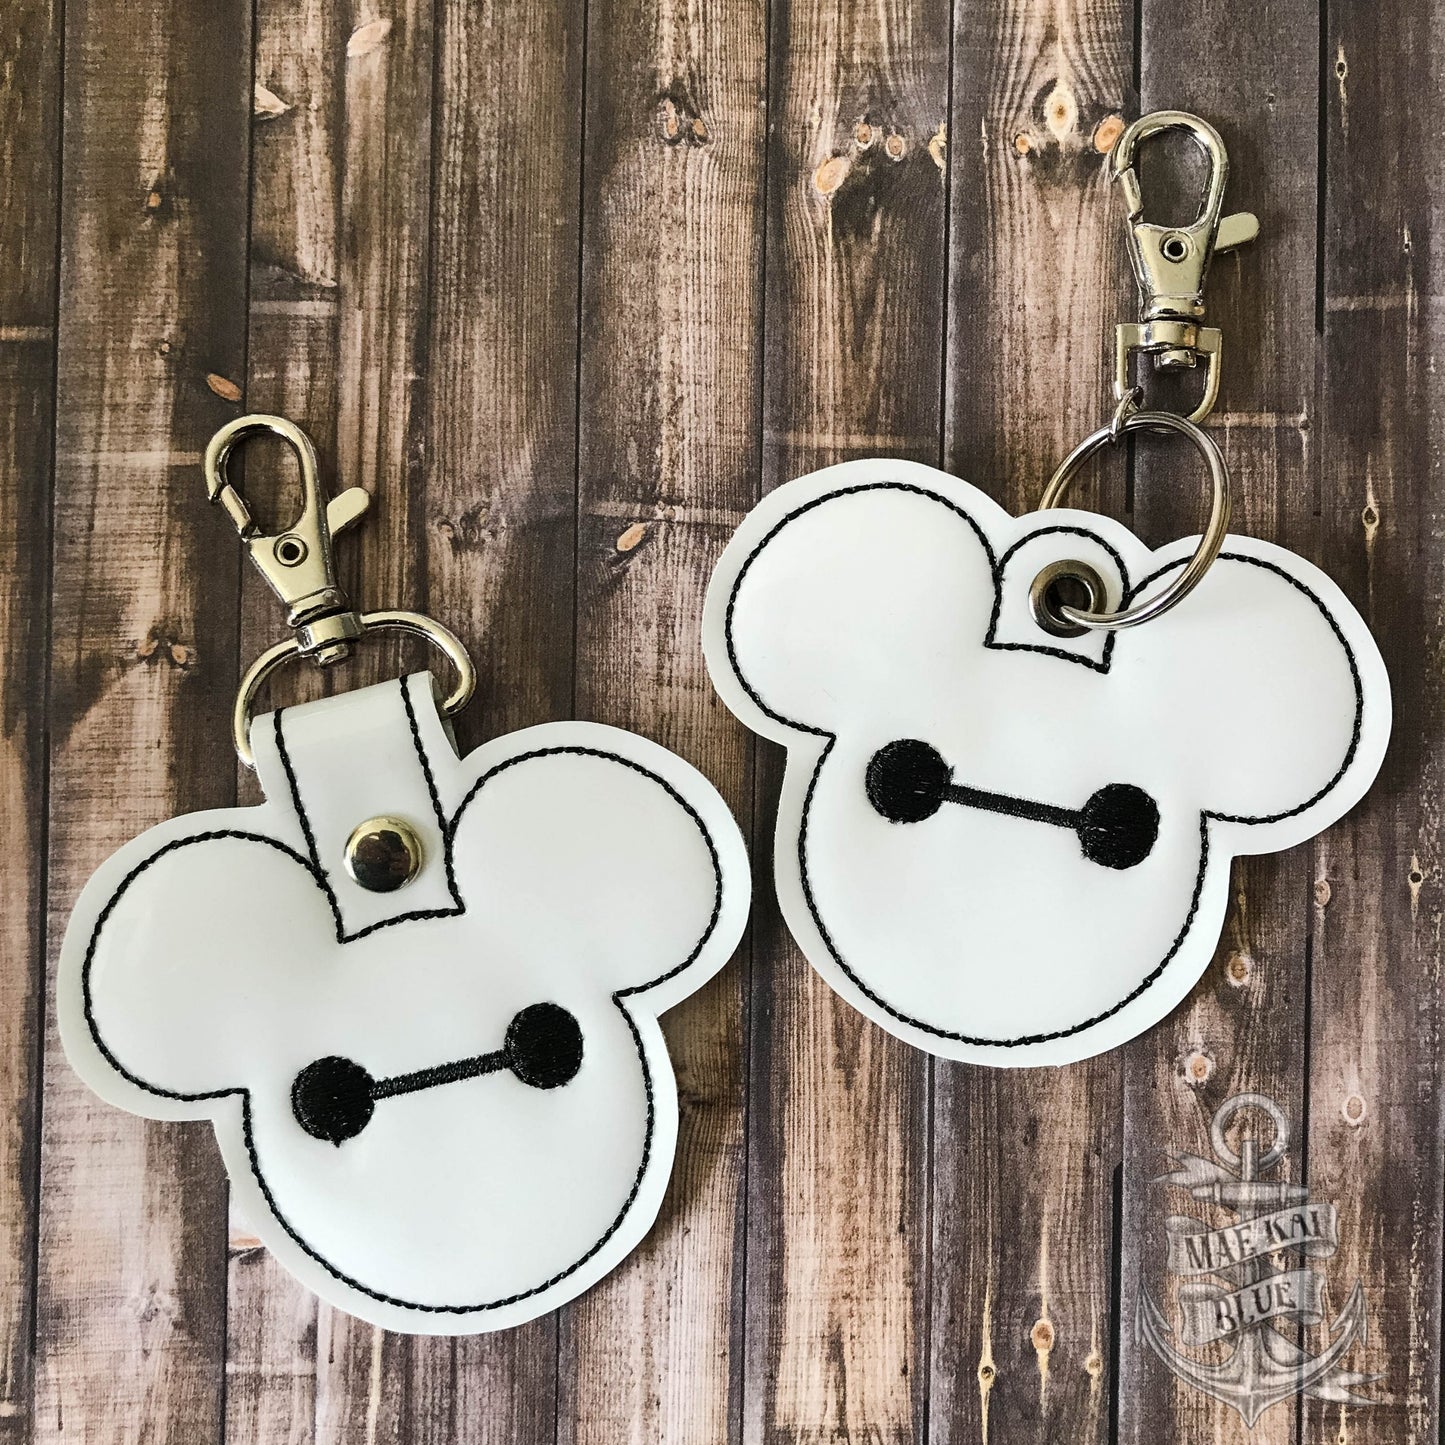 Big Hero Mouse Fobs -  DIGITAL Embroidery DESIGN